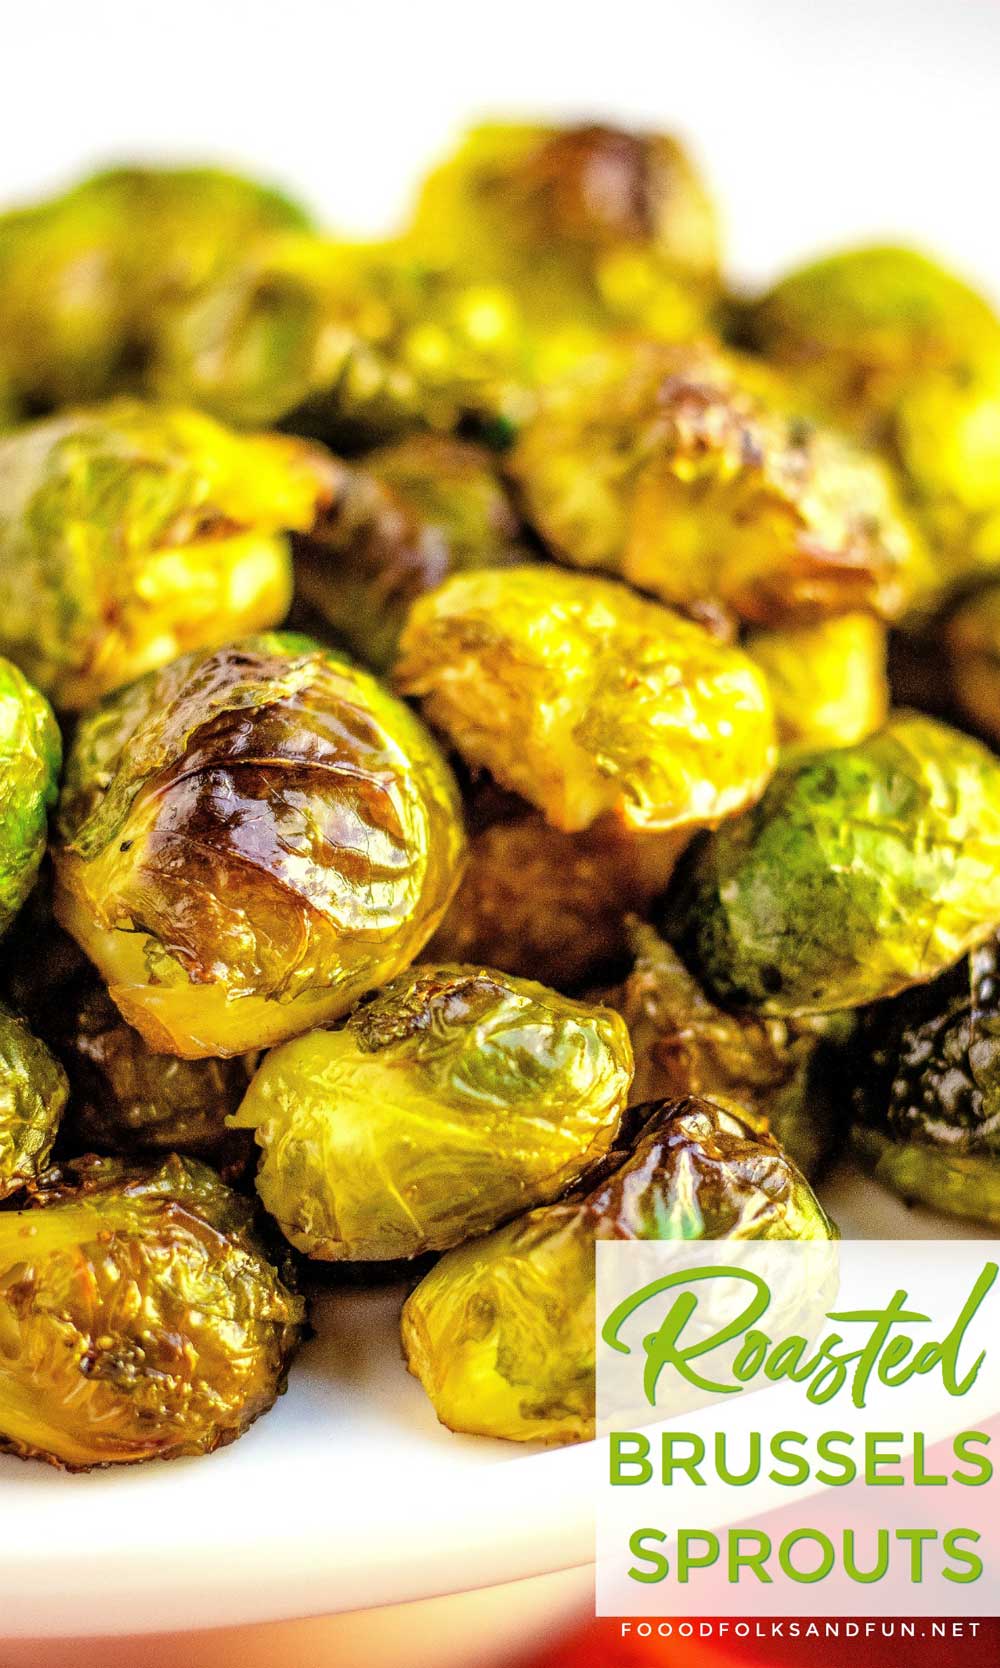 How to Cooke Brussels Sprouts